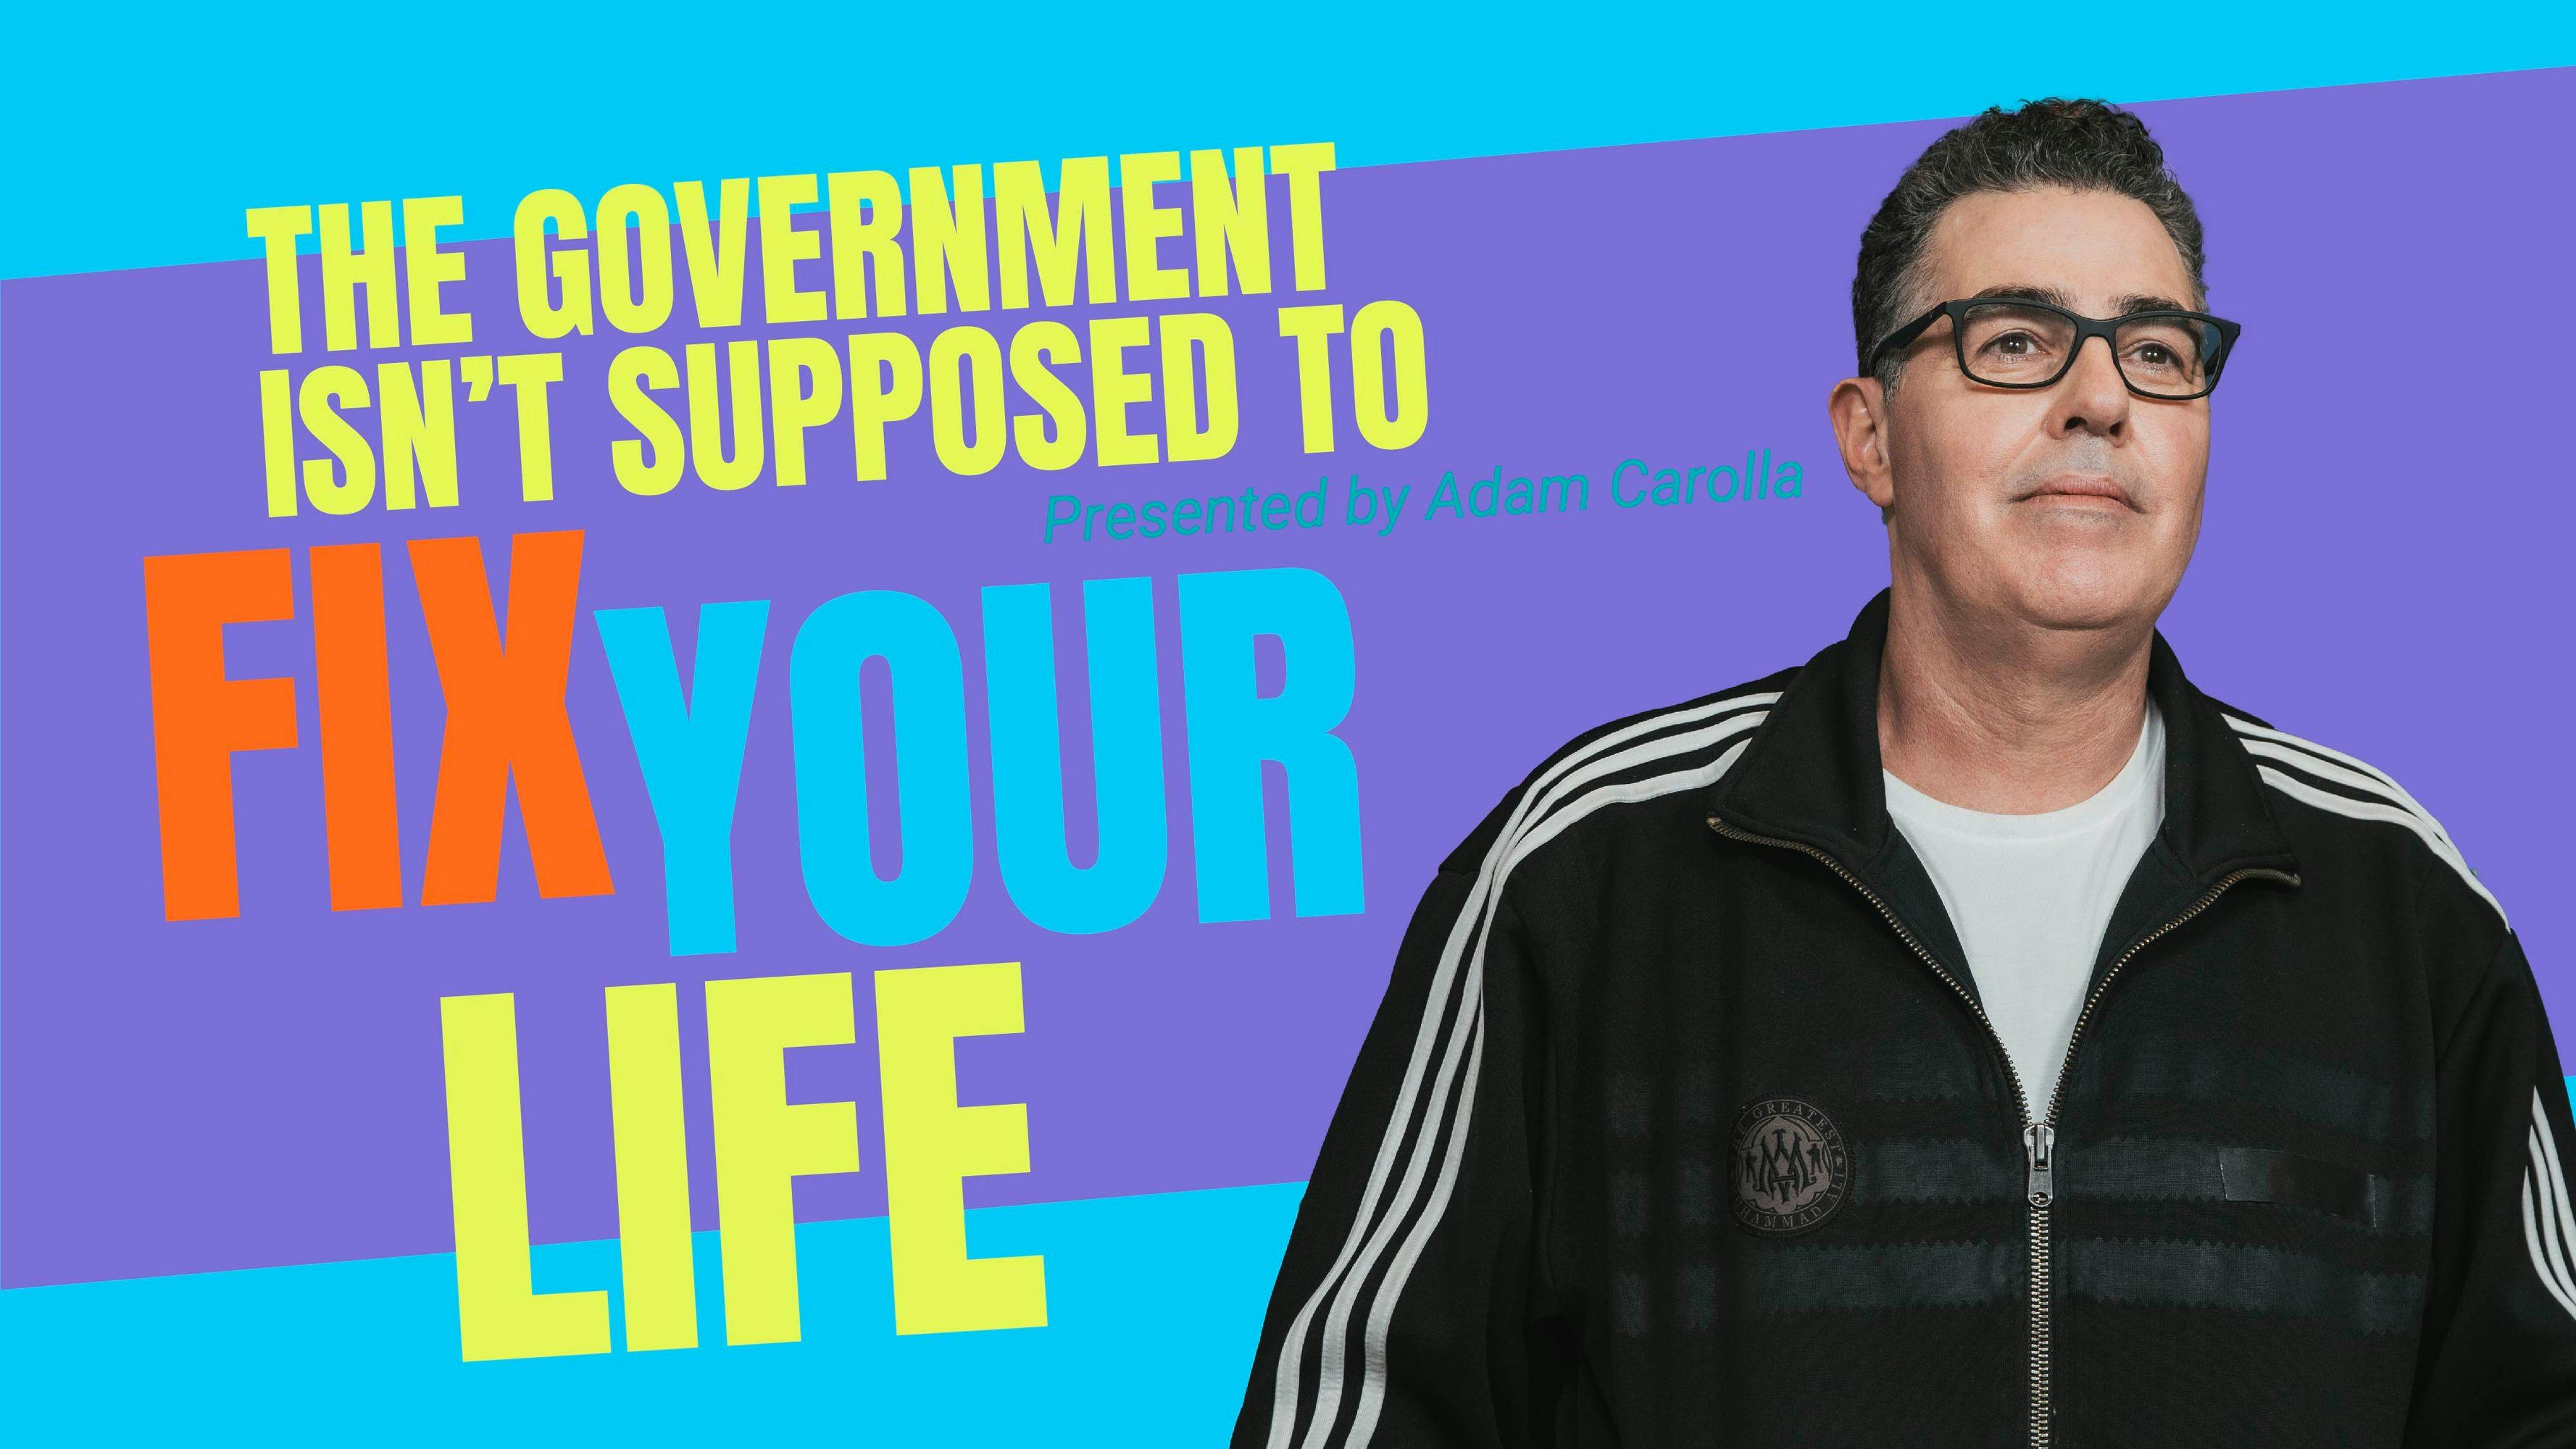 The Government Isn’t Supposed to Fix Your Life